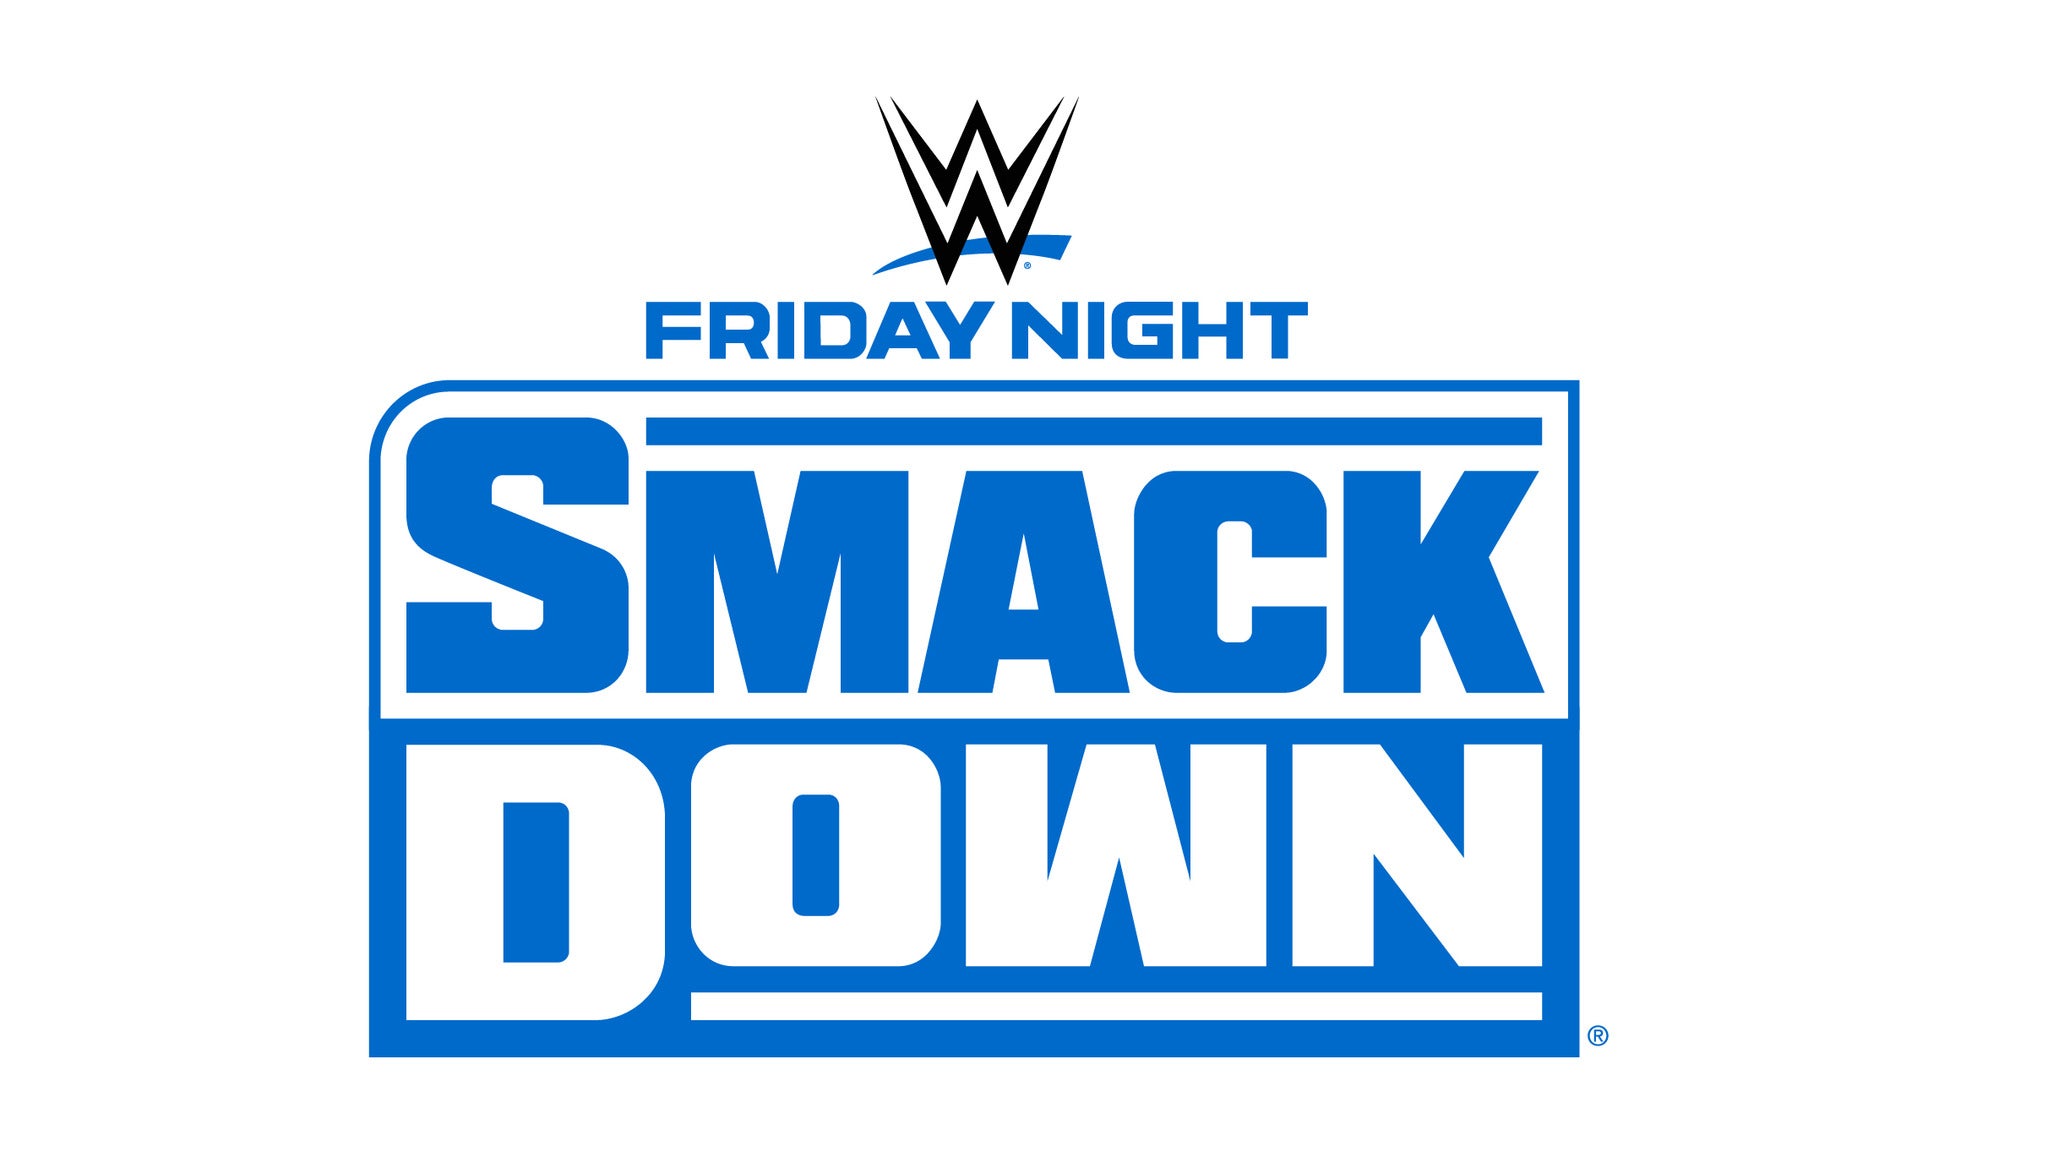 WWE SMACKDOWN presale password for early tickets in Orlando